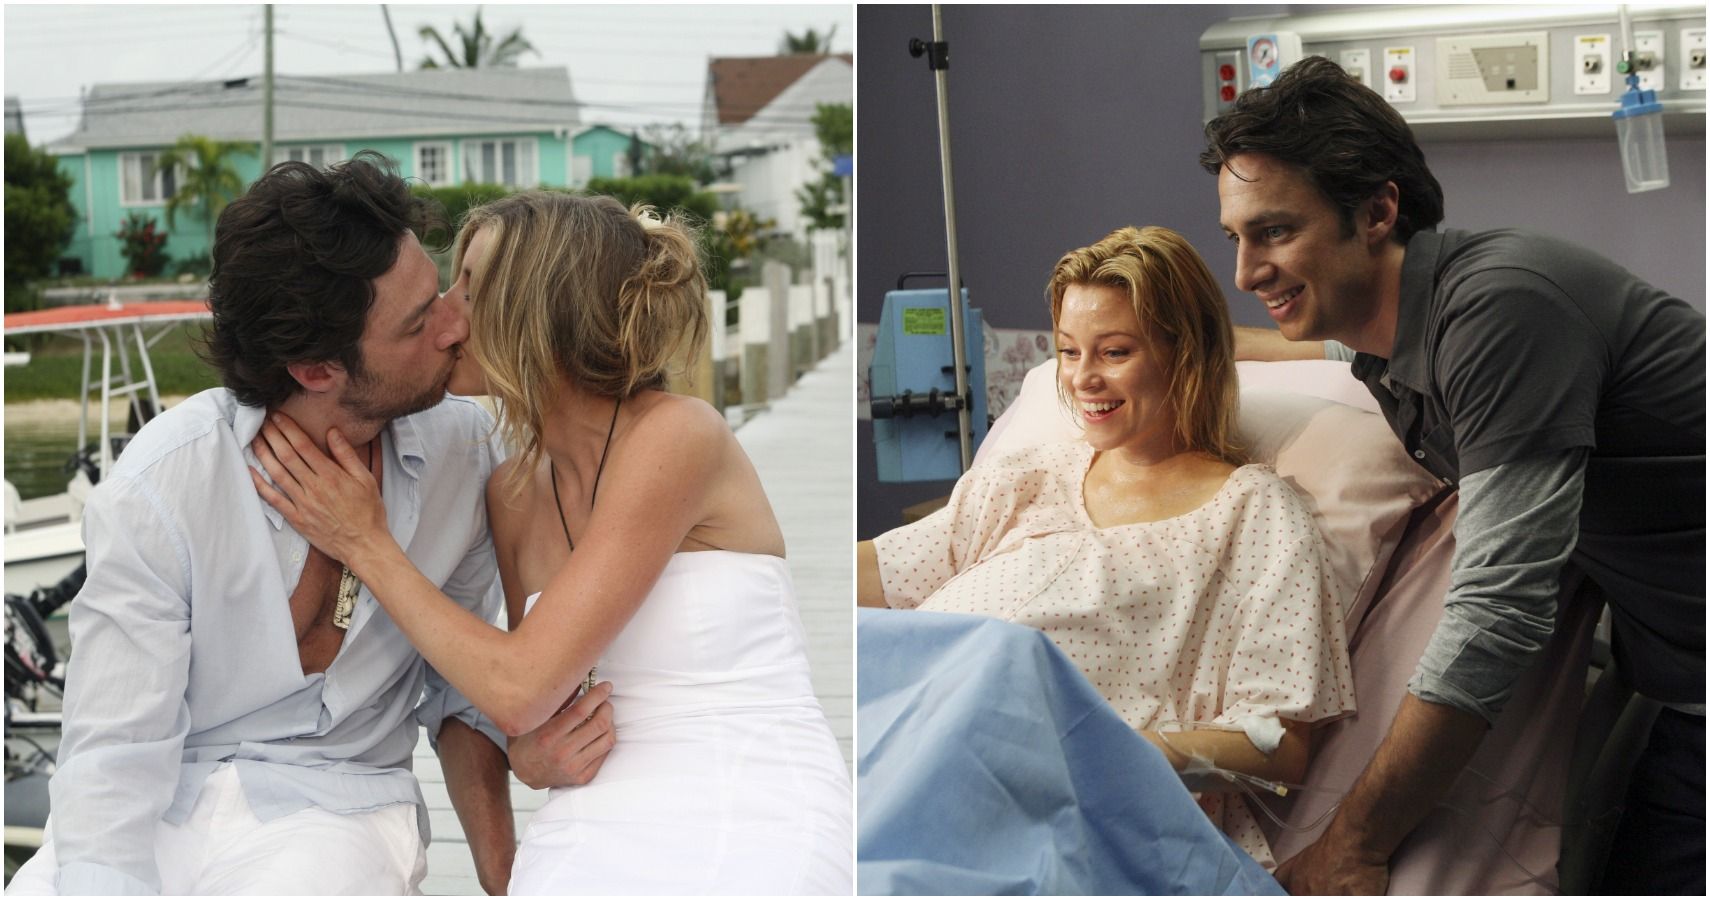 Scrubs 5 Reasons Elliot Was Perfect For JD (& 5 Reasons He Should Have Been With Someone Else)